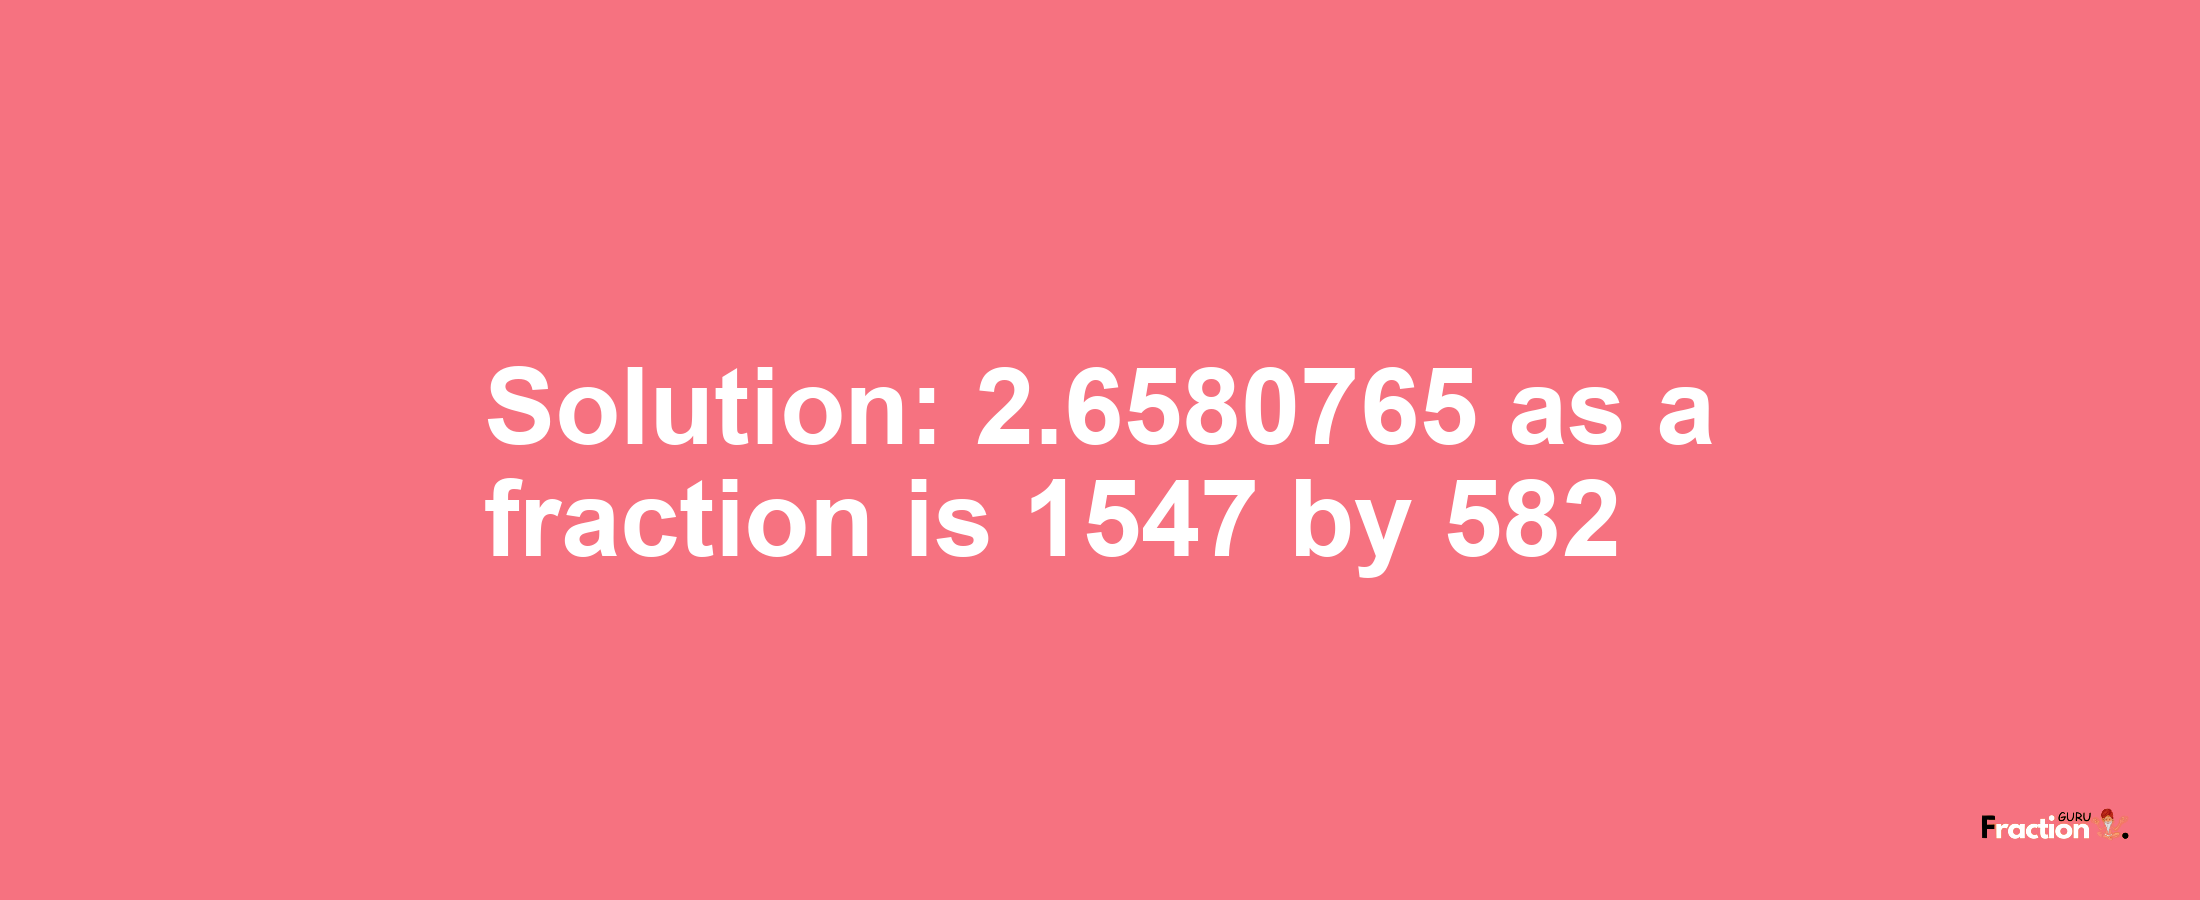 Solution:2.6580765 as a fraction is 1547/582